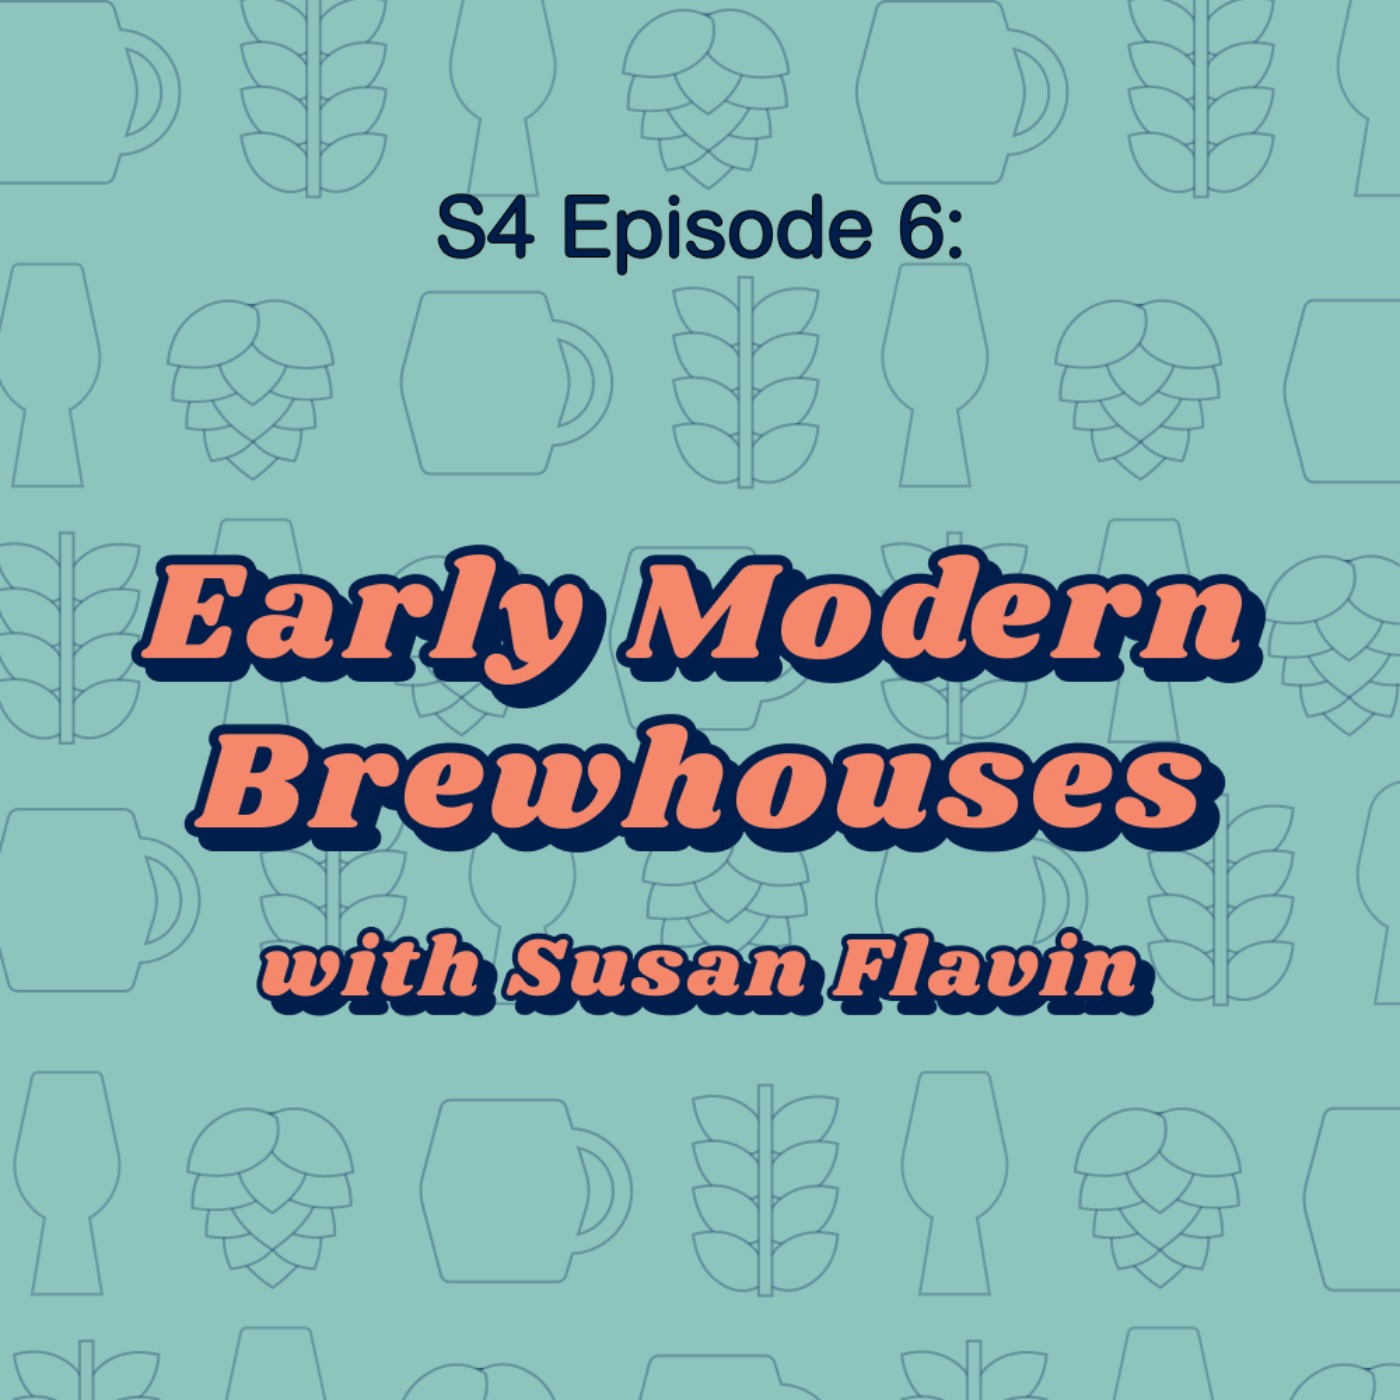 Early Modern Brewhouses with Dr Susan Flavin